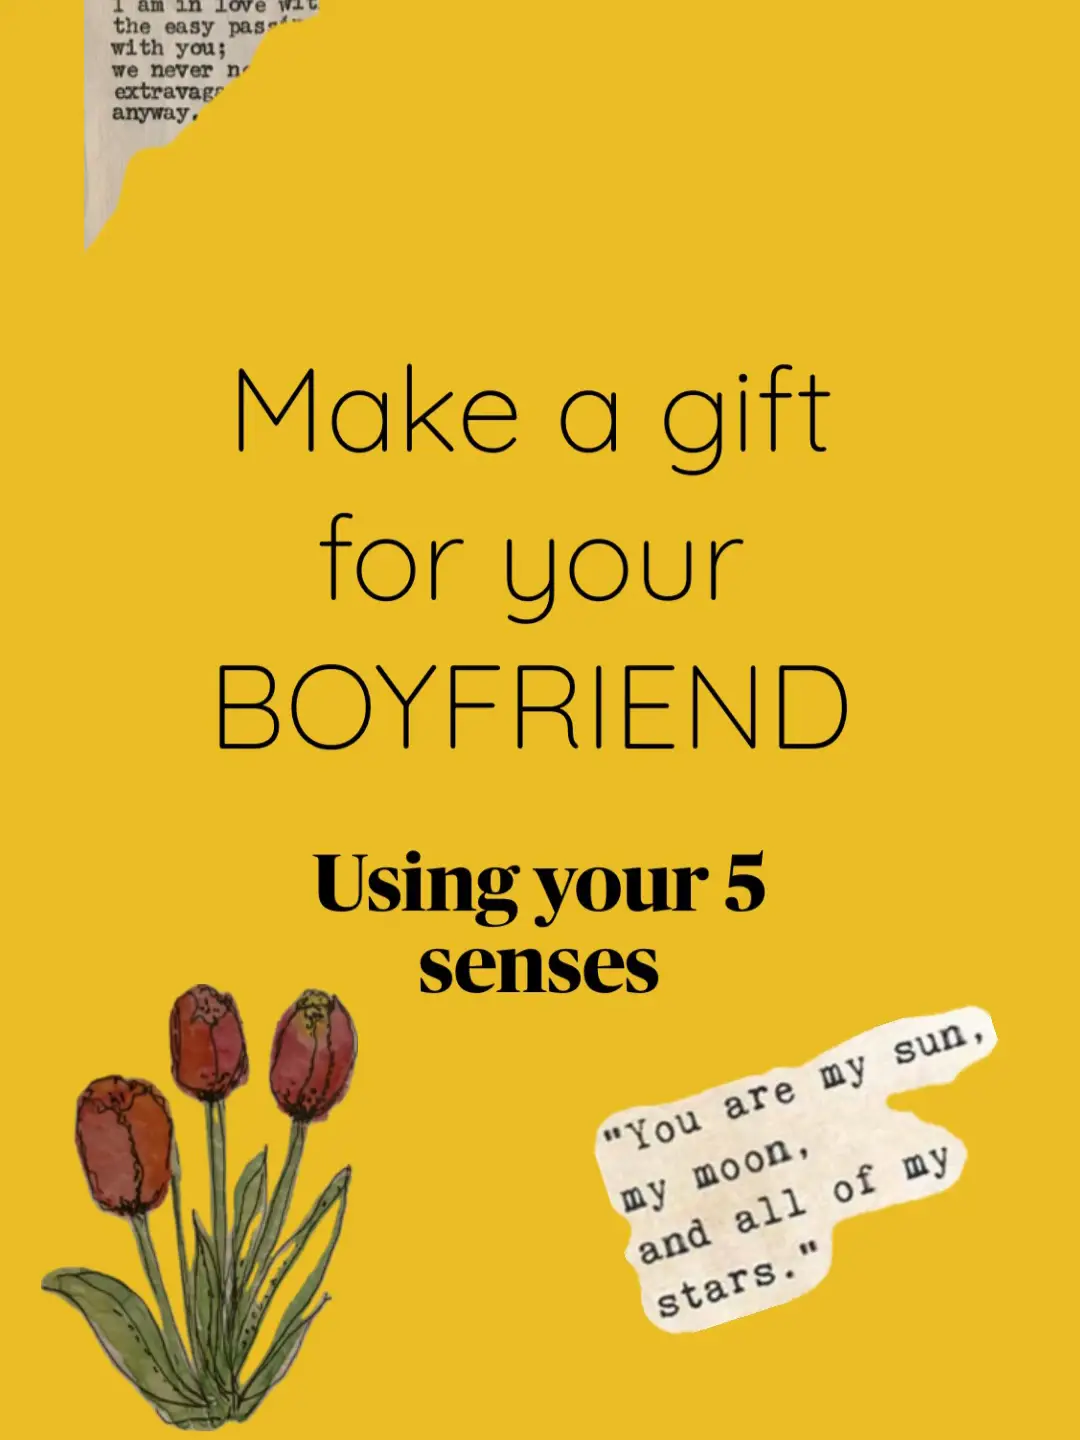 5 senses gift 🎁  Gifts for fiance, Birthday gifts for boyfriend